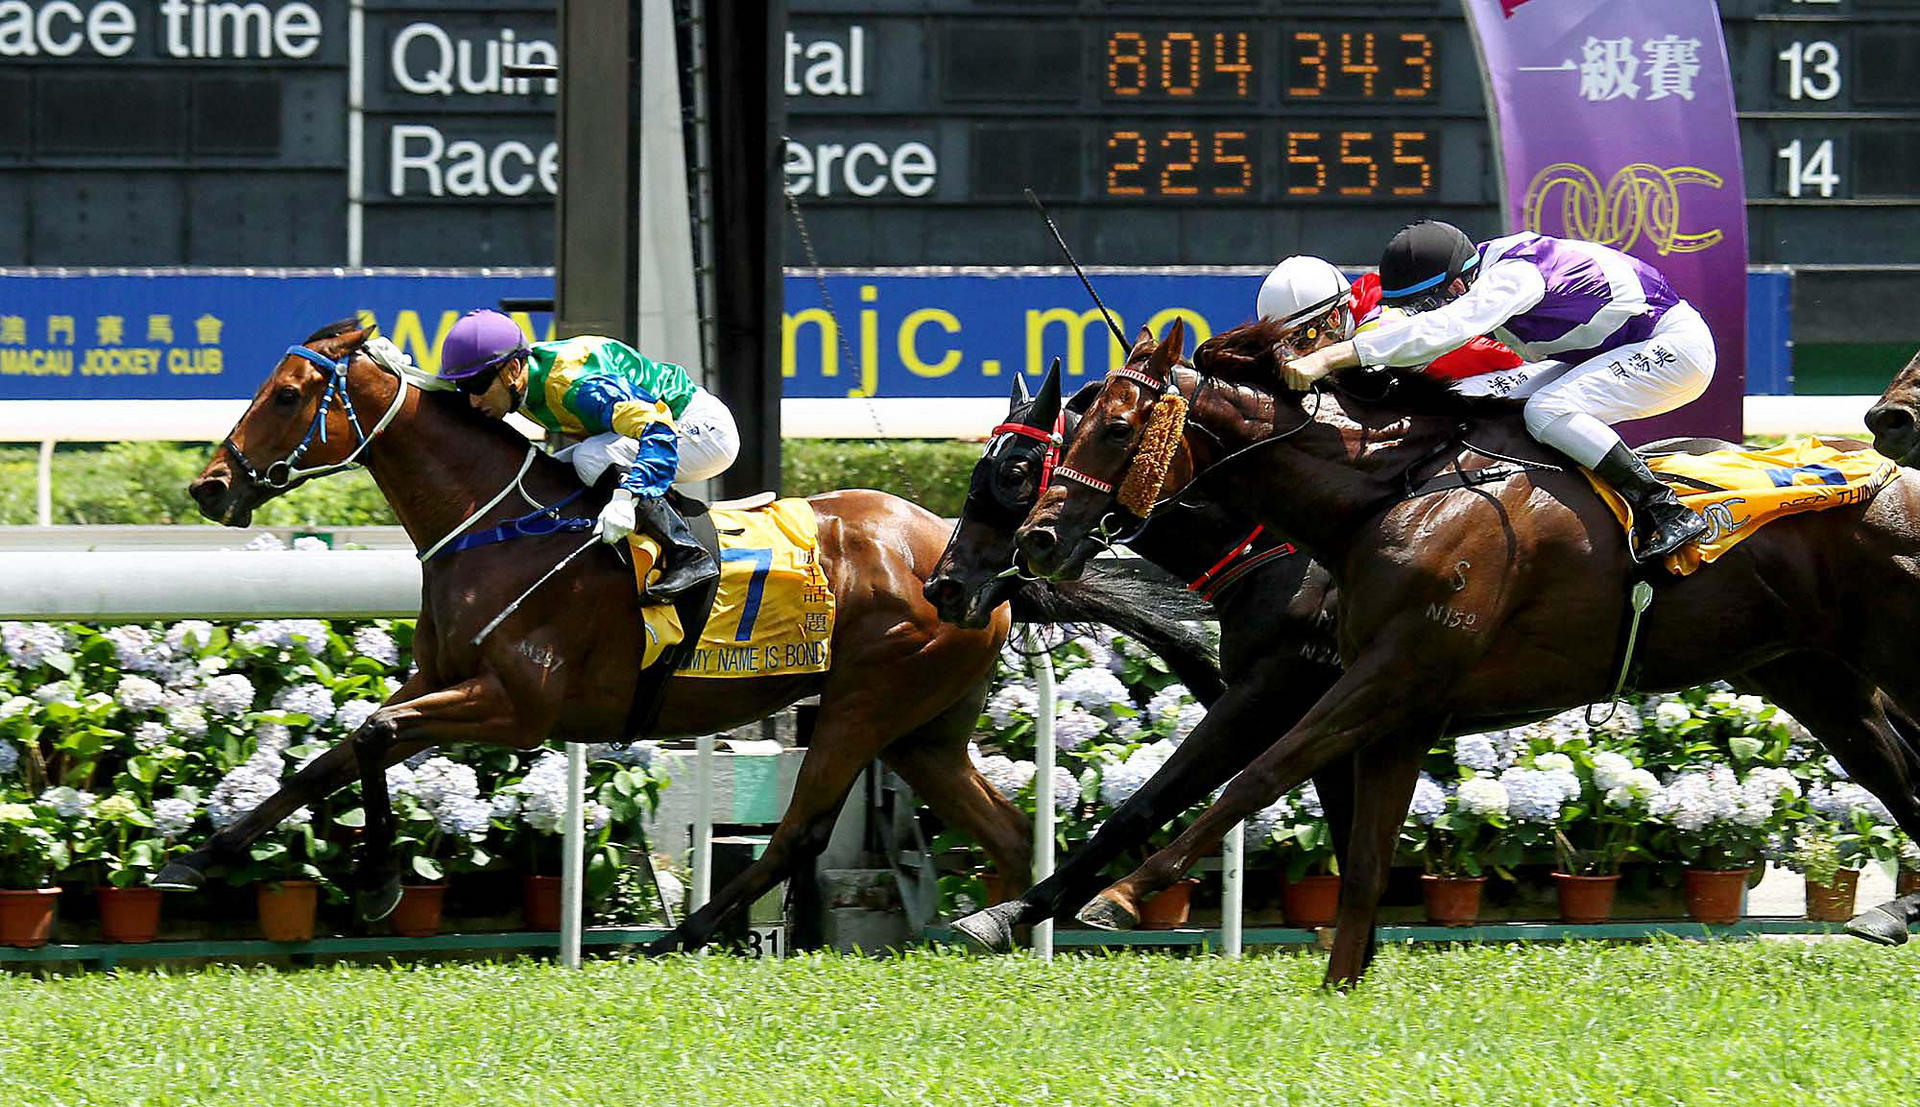 My Name Is Bond, ridden by Joao Moreira, wins the Macau Hong Kong Trophy for trainer Caspar Fownes at Taipa. Photo: HKJC